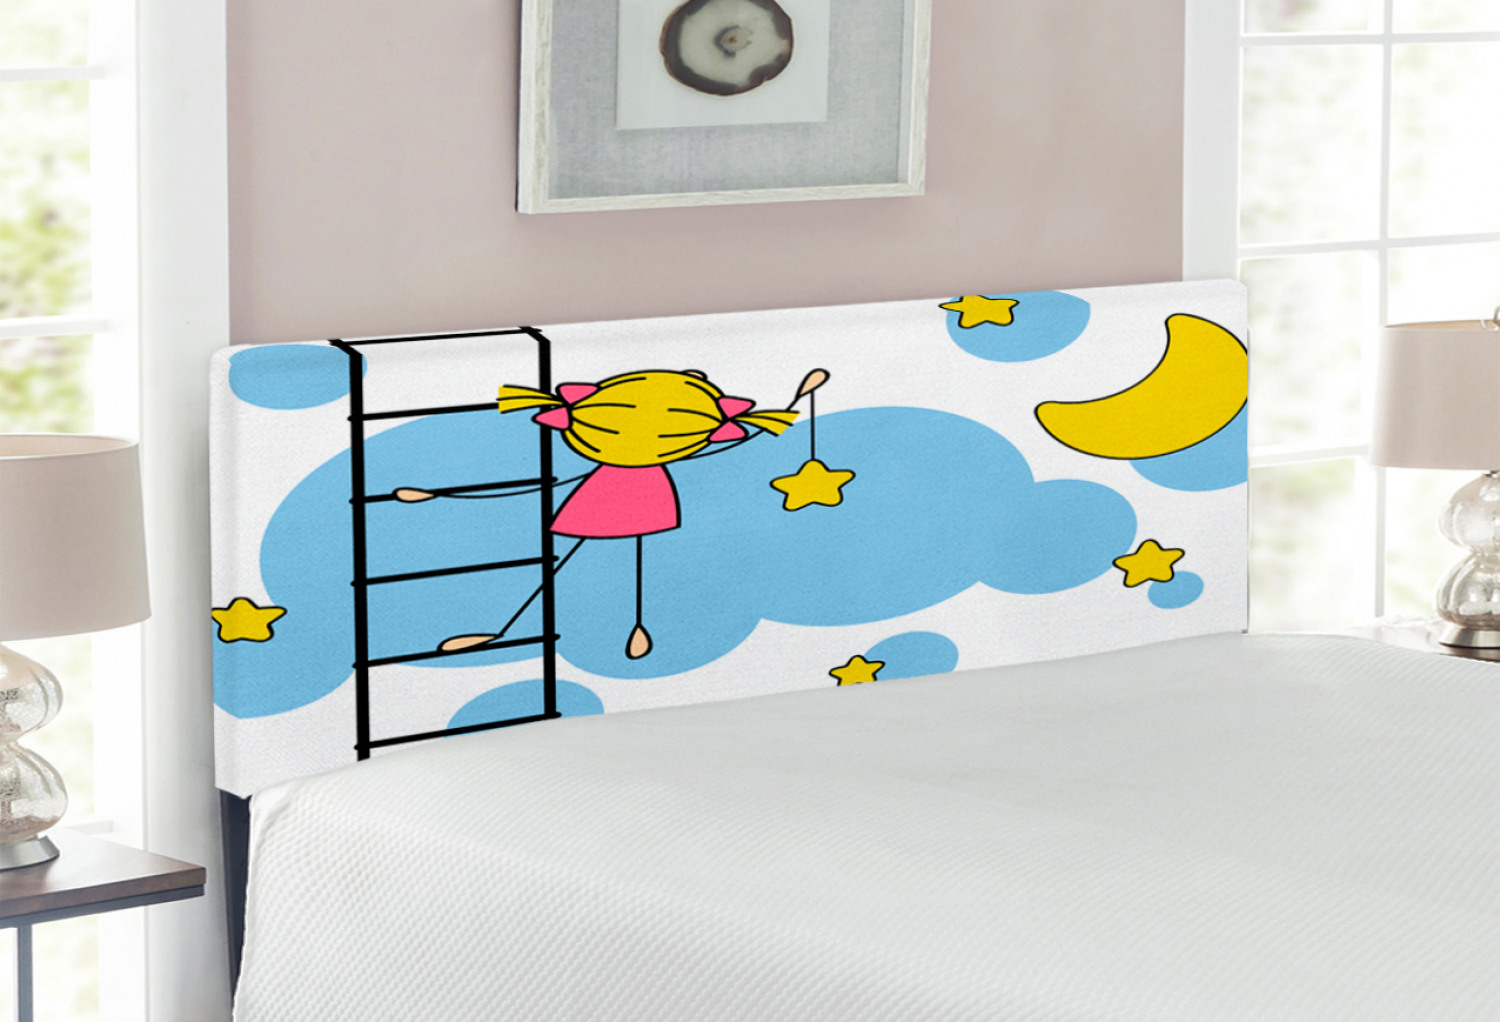 Star Headboard, Girl on Ladder Hanging a Star in the Night Sky with Half Moon Cartoon Picture, Upholstered Decorative Metal Bed Headboard with Memory Foam, Full Size, Yellow Blue, by Ambesonne - image 2 of 4